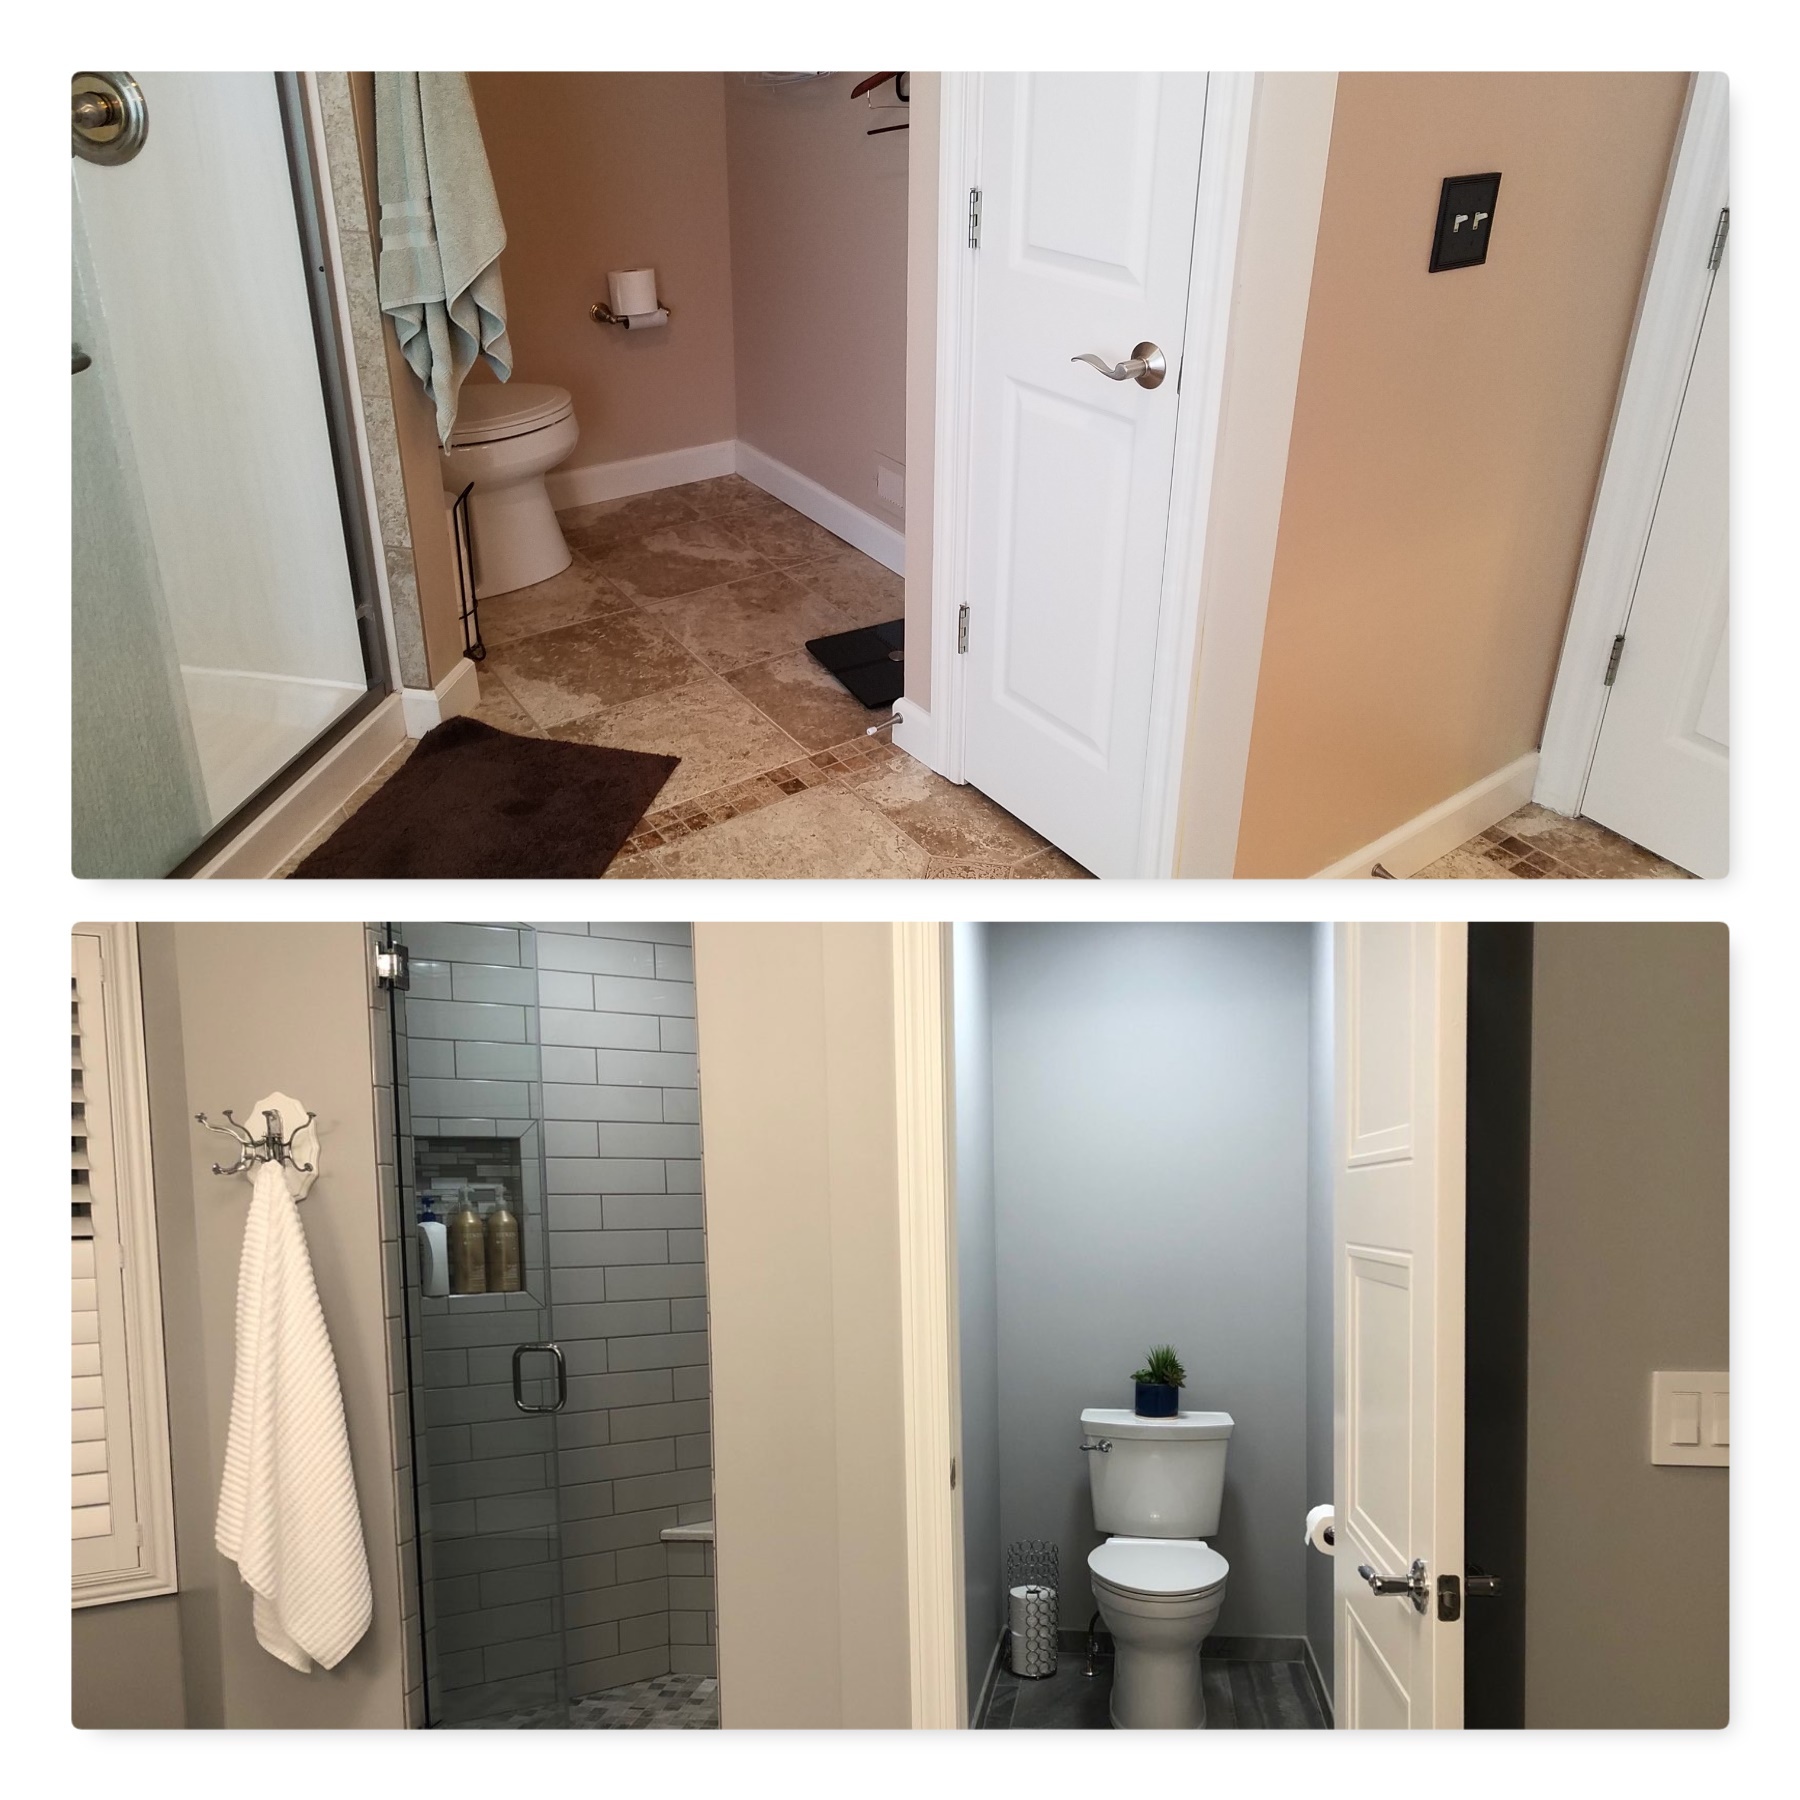 Before and After Bathroom Remodel Project